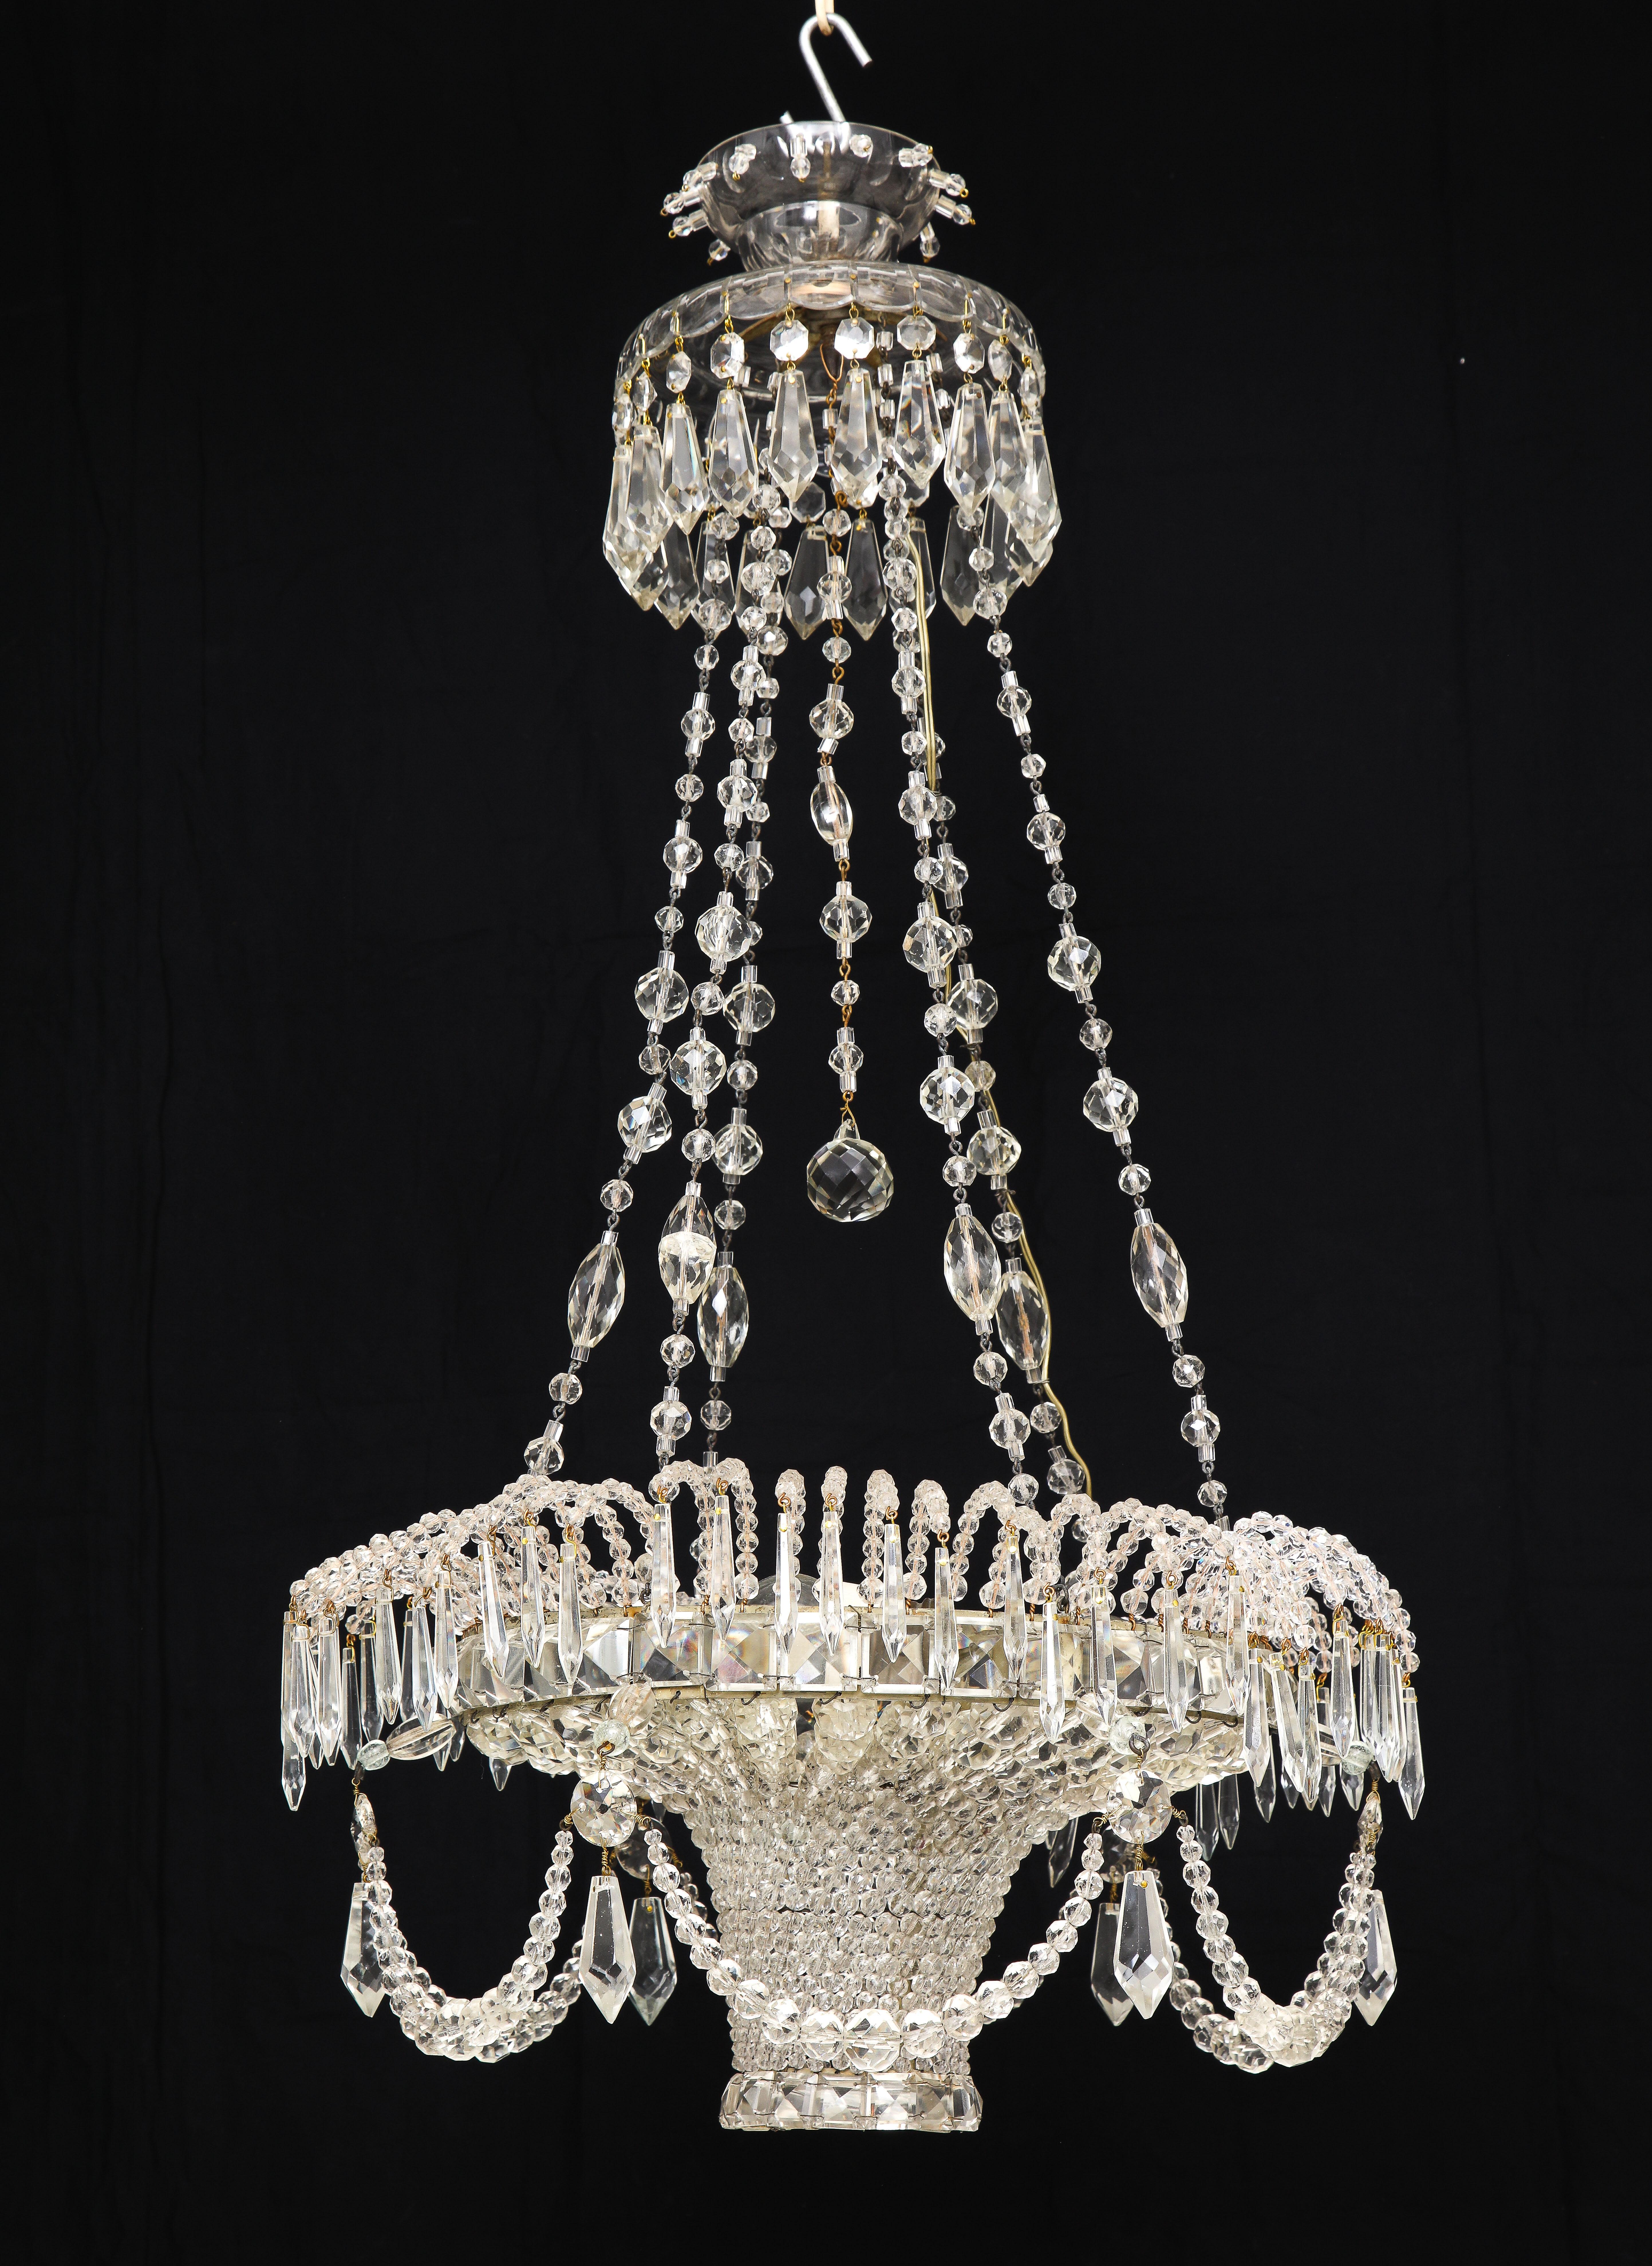 Of elegant basket form festooned with crystal garlands and hanging from a chains beaded with varying sized crystal beads, set below a cut glass collar hung with cut crystal pendants. With three-light - electrified.